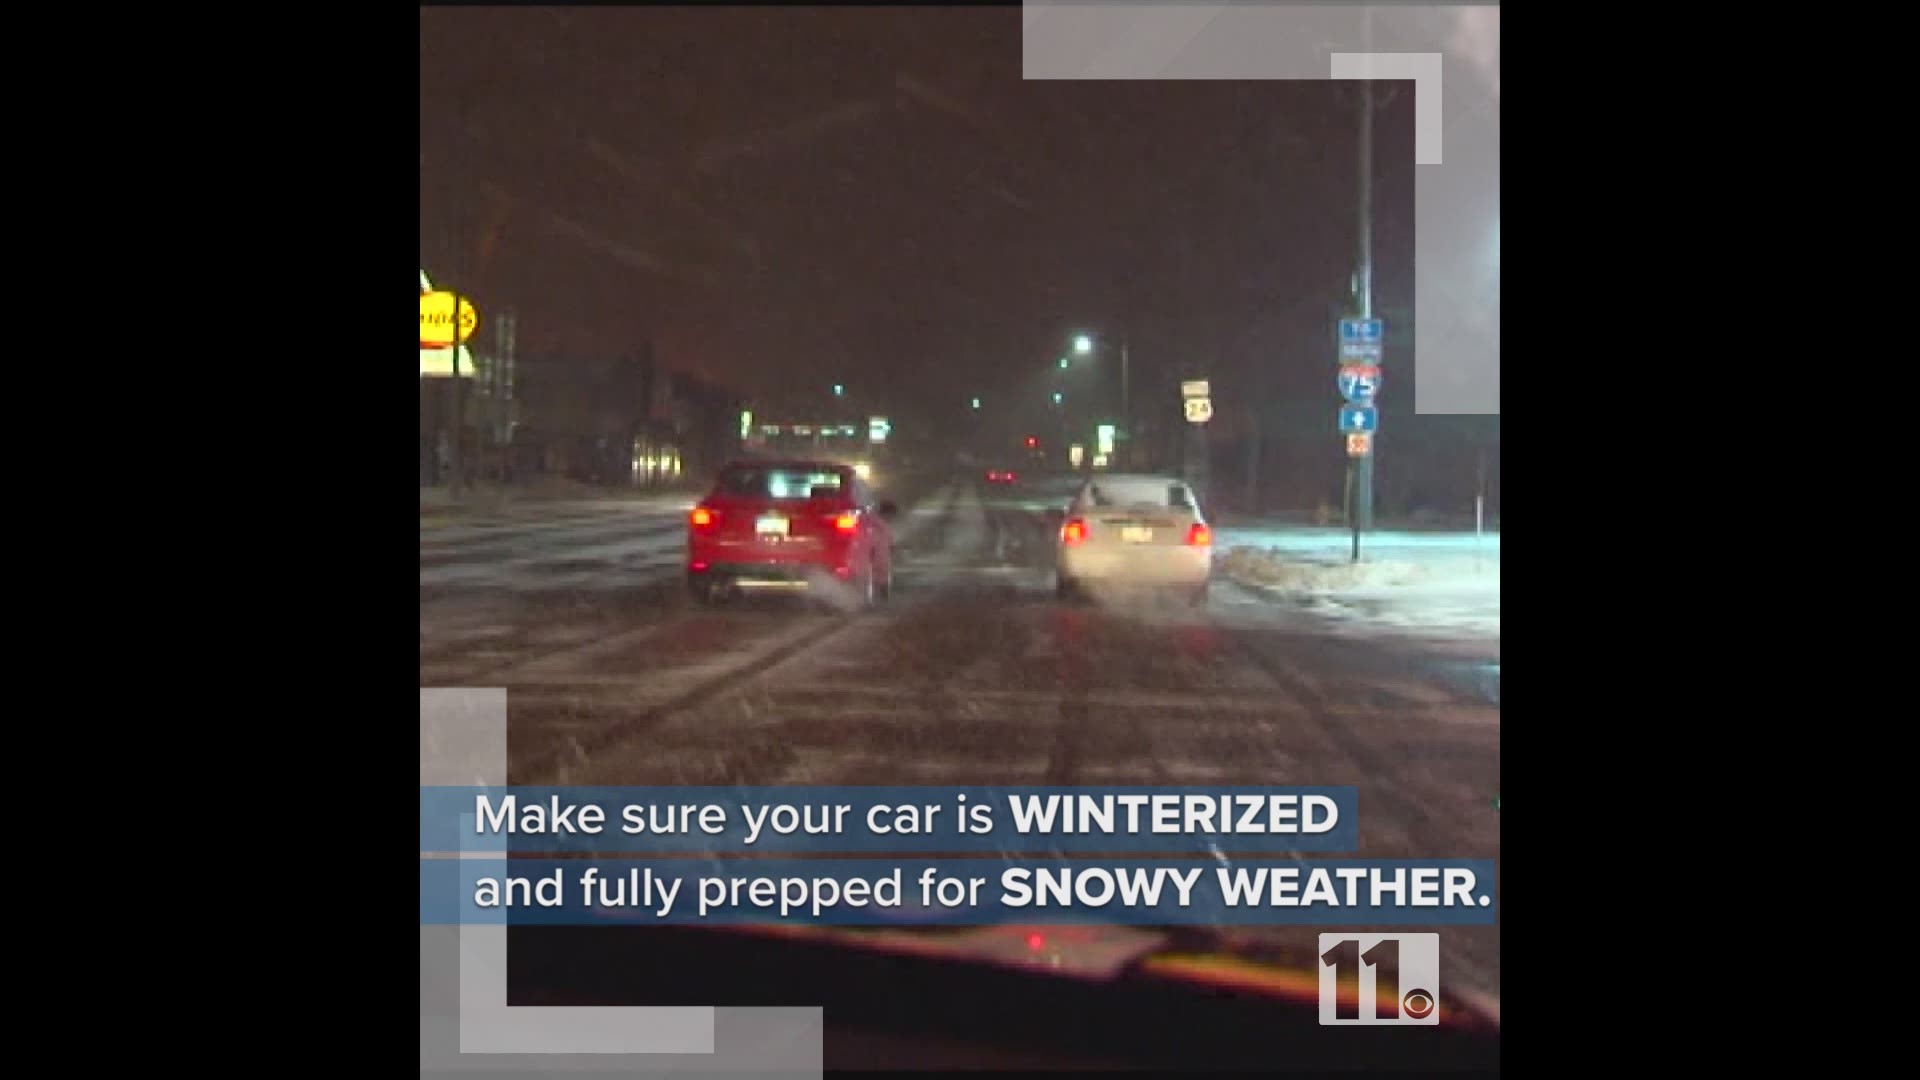 Auto care shops don't want you to wait to winterize your car.